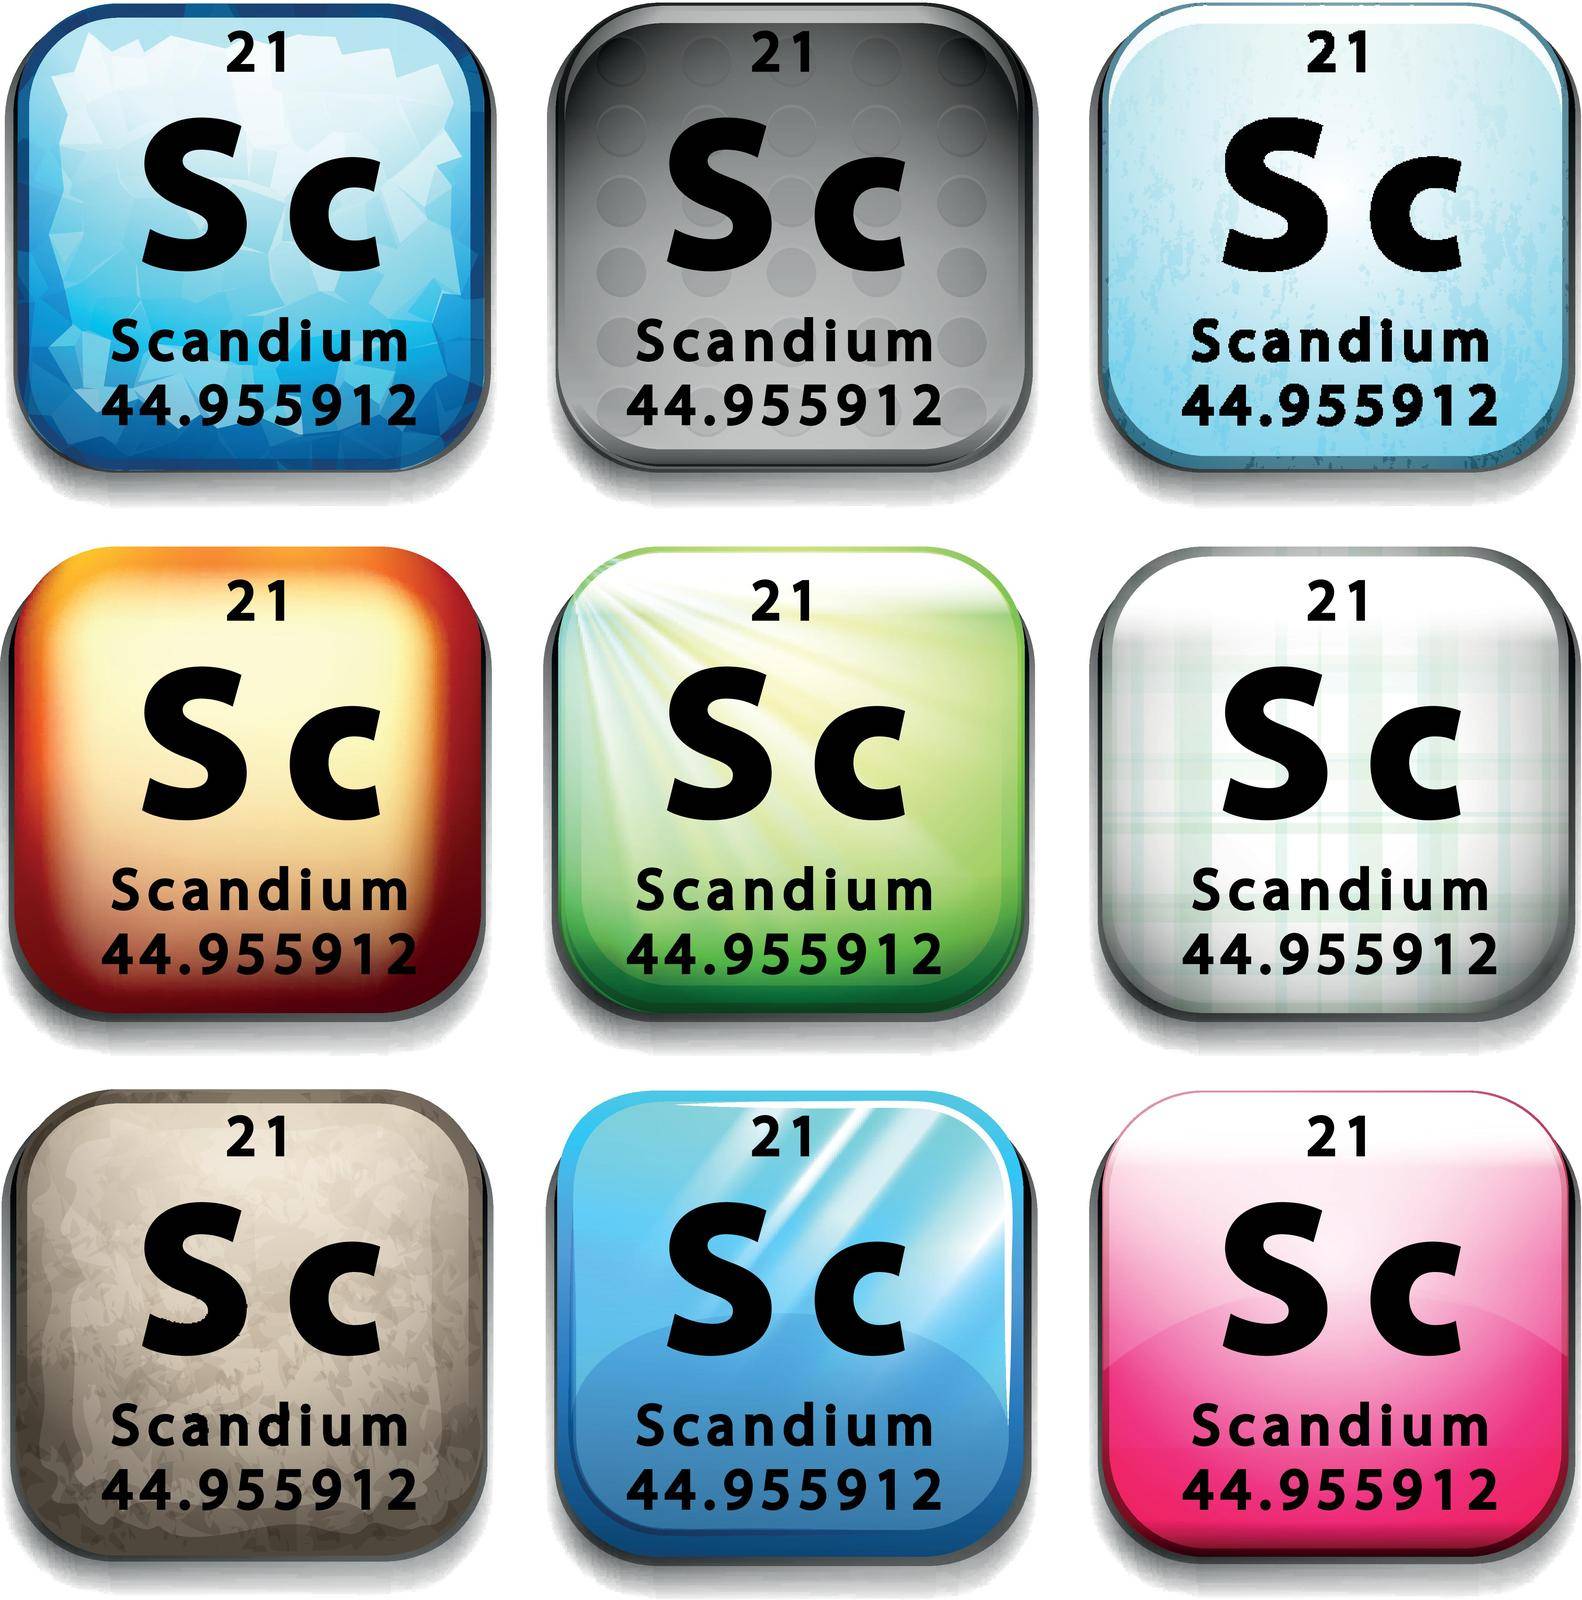 The chemical element Scandium by iimages